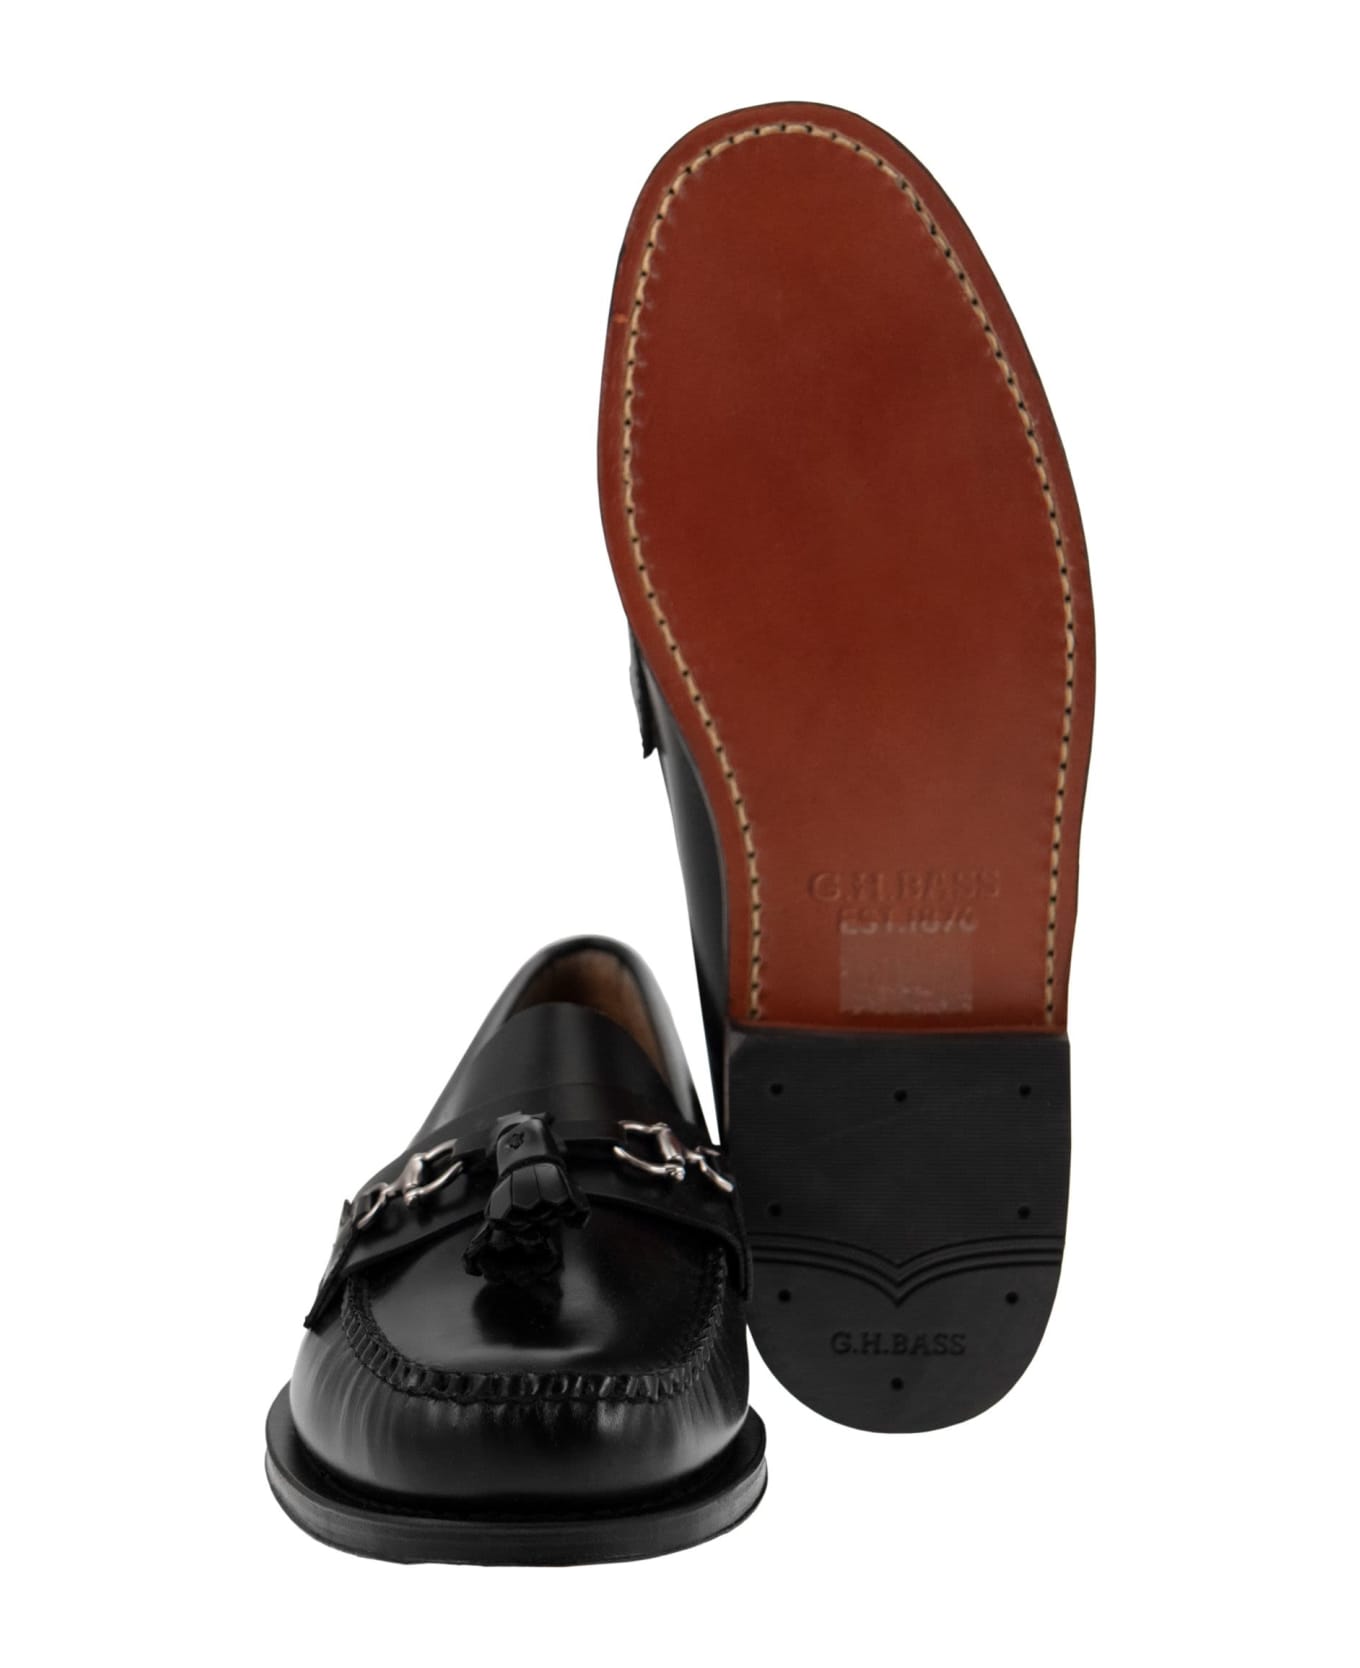 G.H.Bass & Co. Weejun - Leather Moccasins With Tassels - Black